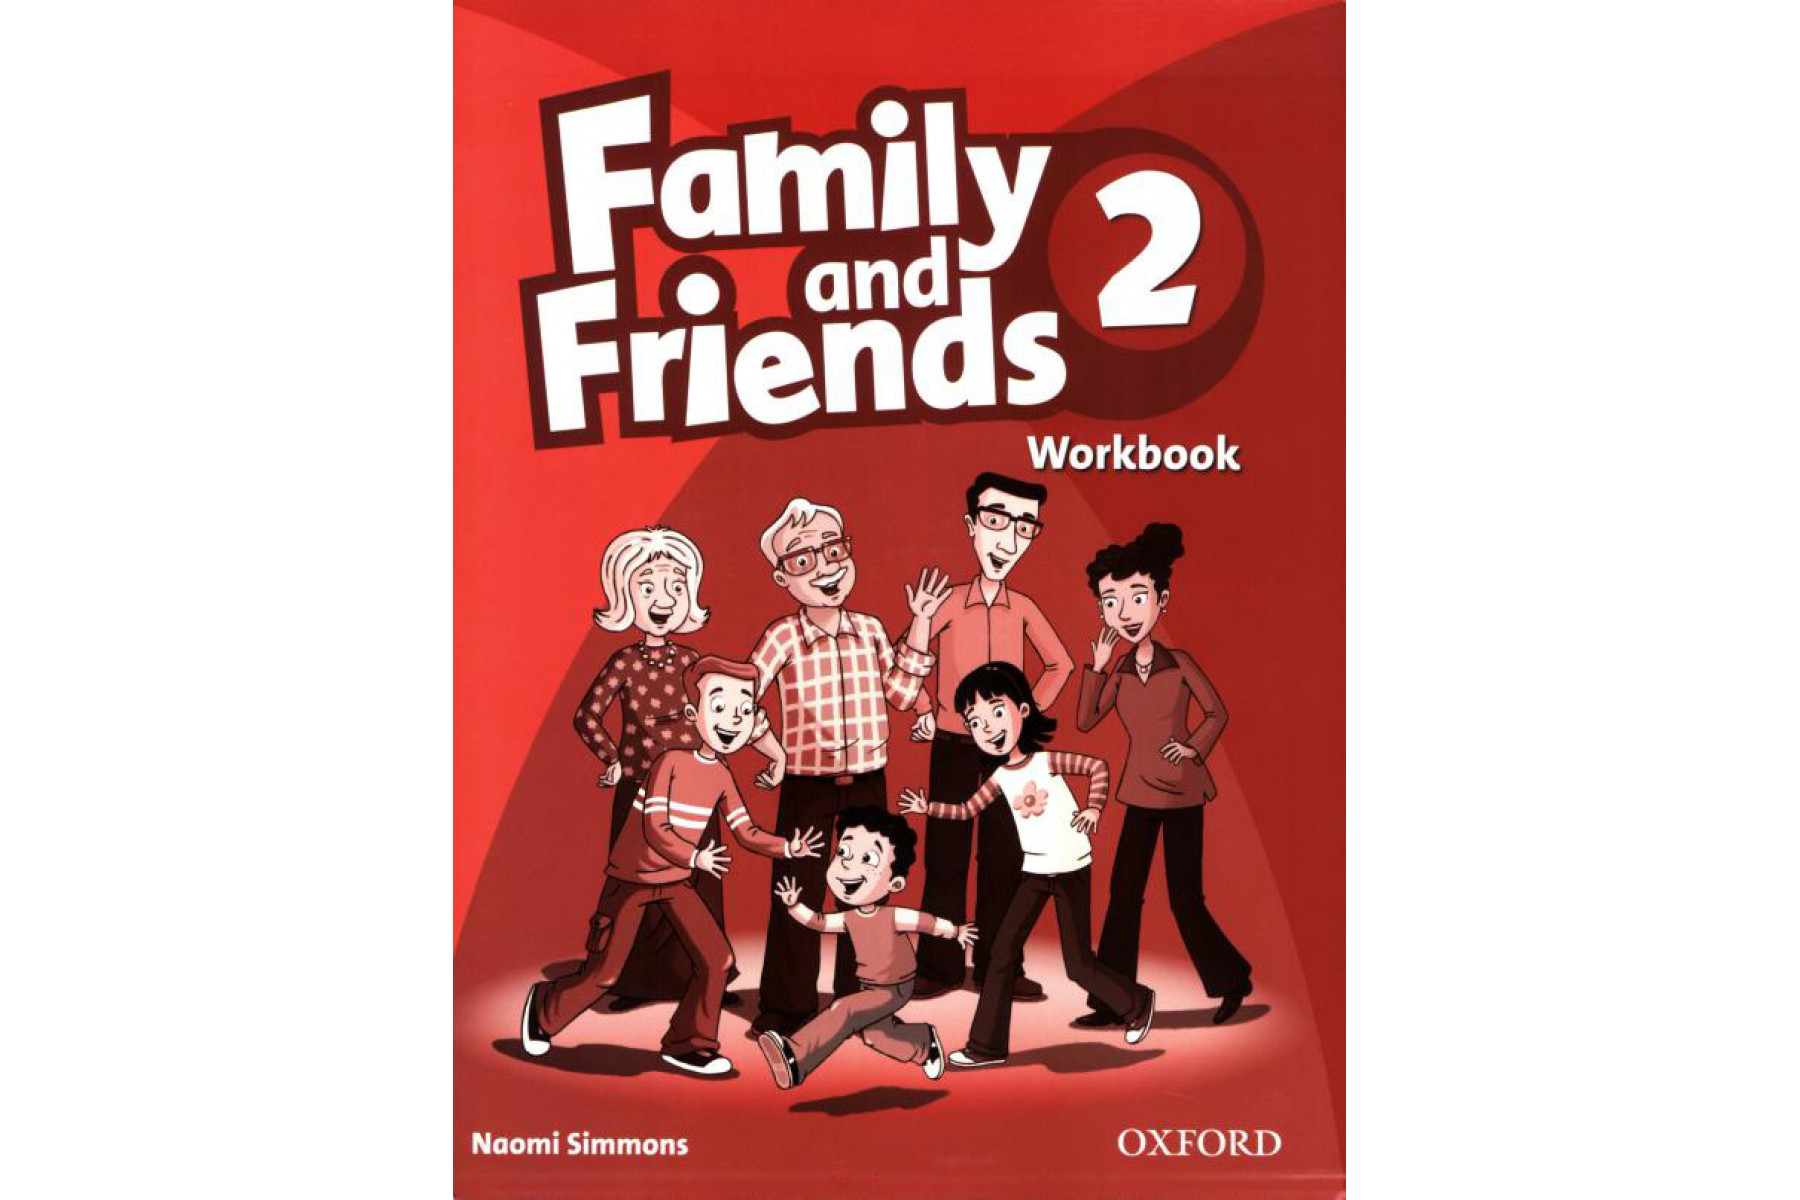 Family and Friends: 2: Workbook